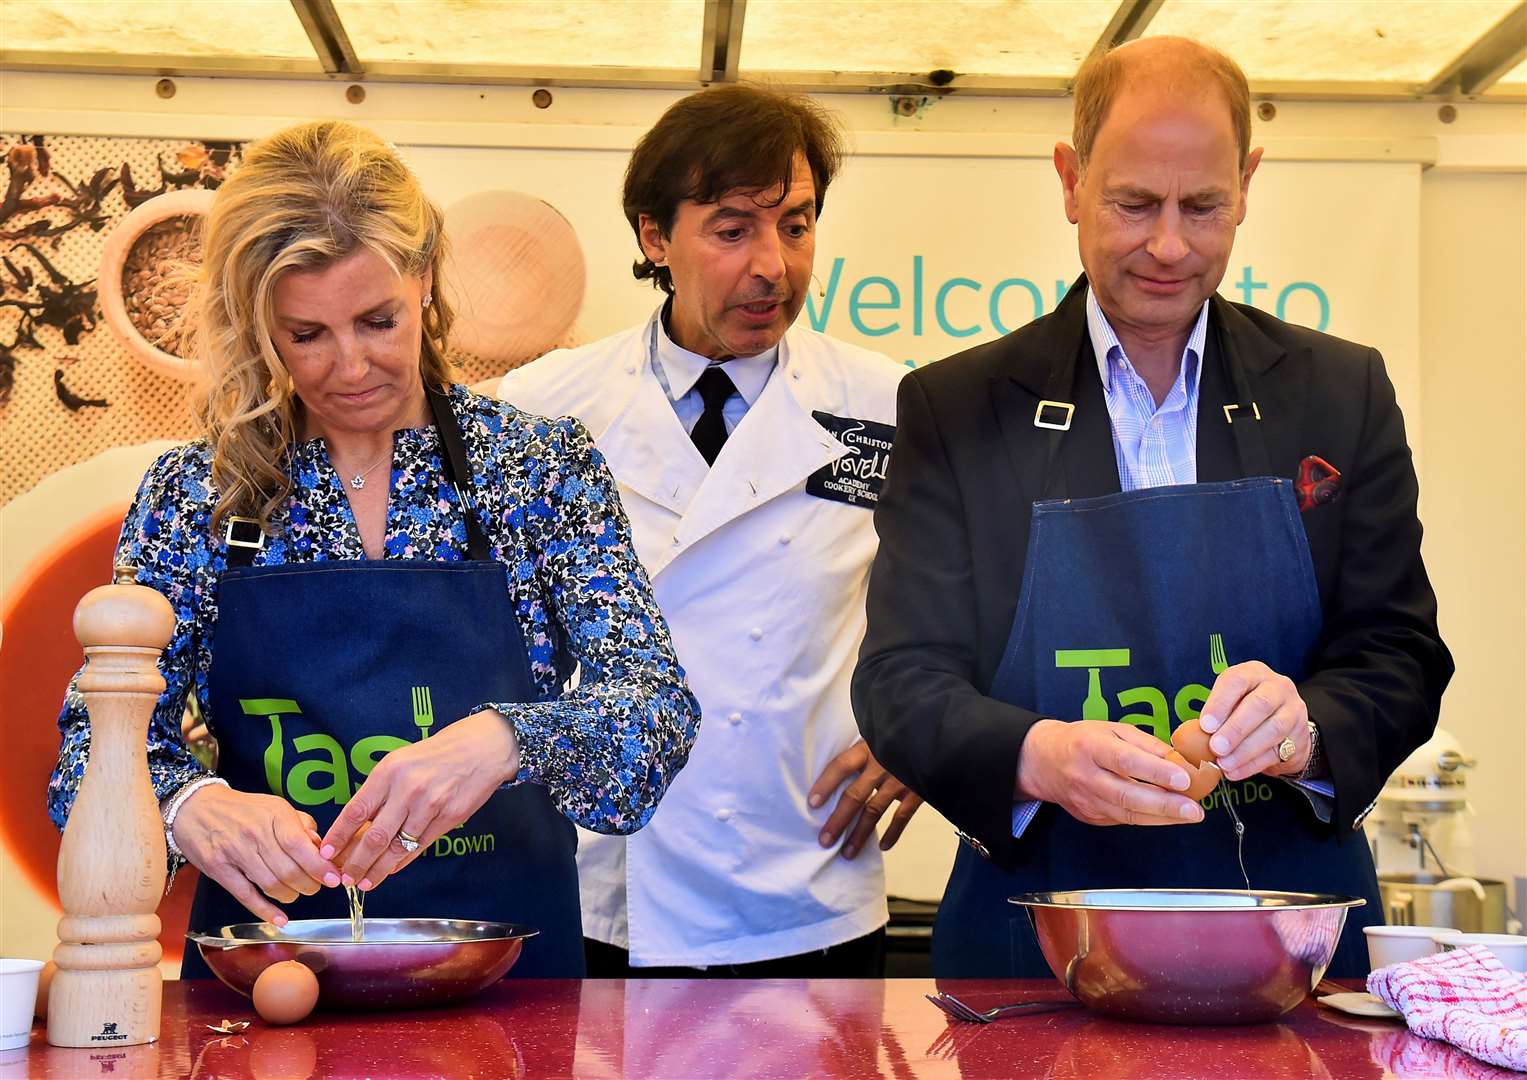 The Earl and Countess of Wessex visited Belfast and Bangor in Northern Ireland where French chef Jean-Christophe Novelli challenged them to make omelettes (Clodagh Kilcoyne/PA)